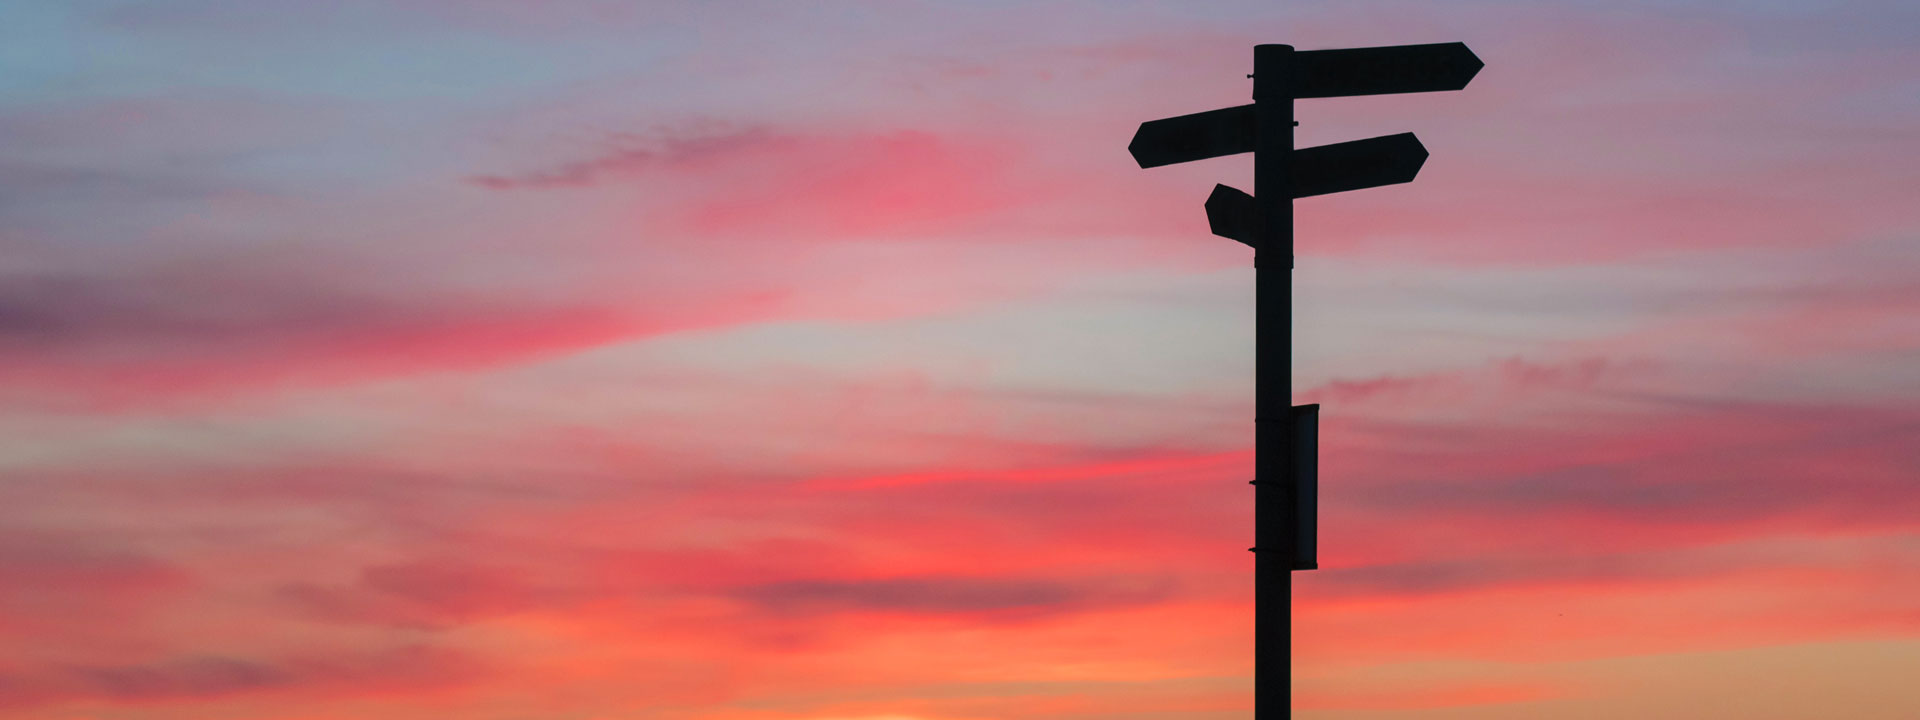 Silhouette of a directional sign against a blue and pink sunrise.